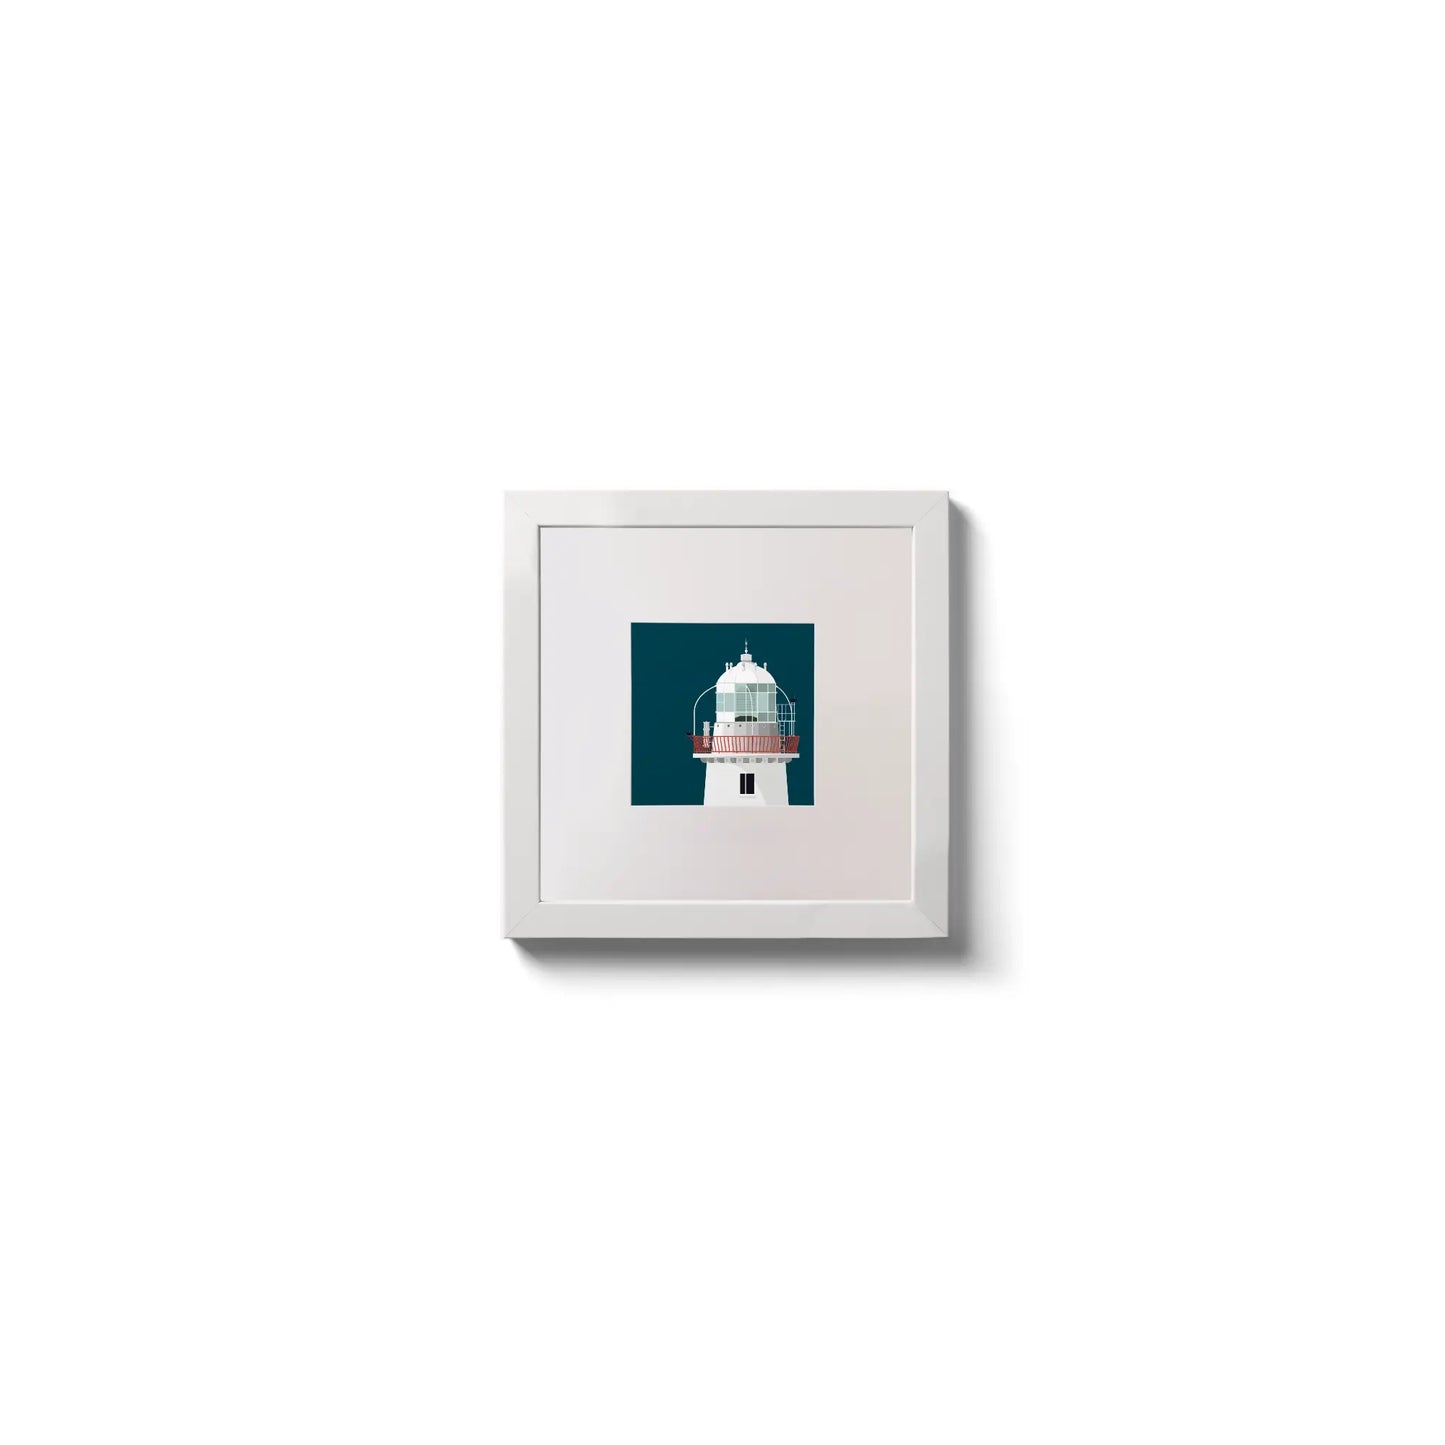 Illustration of Roches Point lighthouse on a midnight blue background,  in a white square frame measuring 10x10cm.